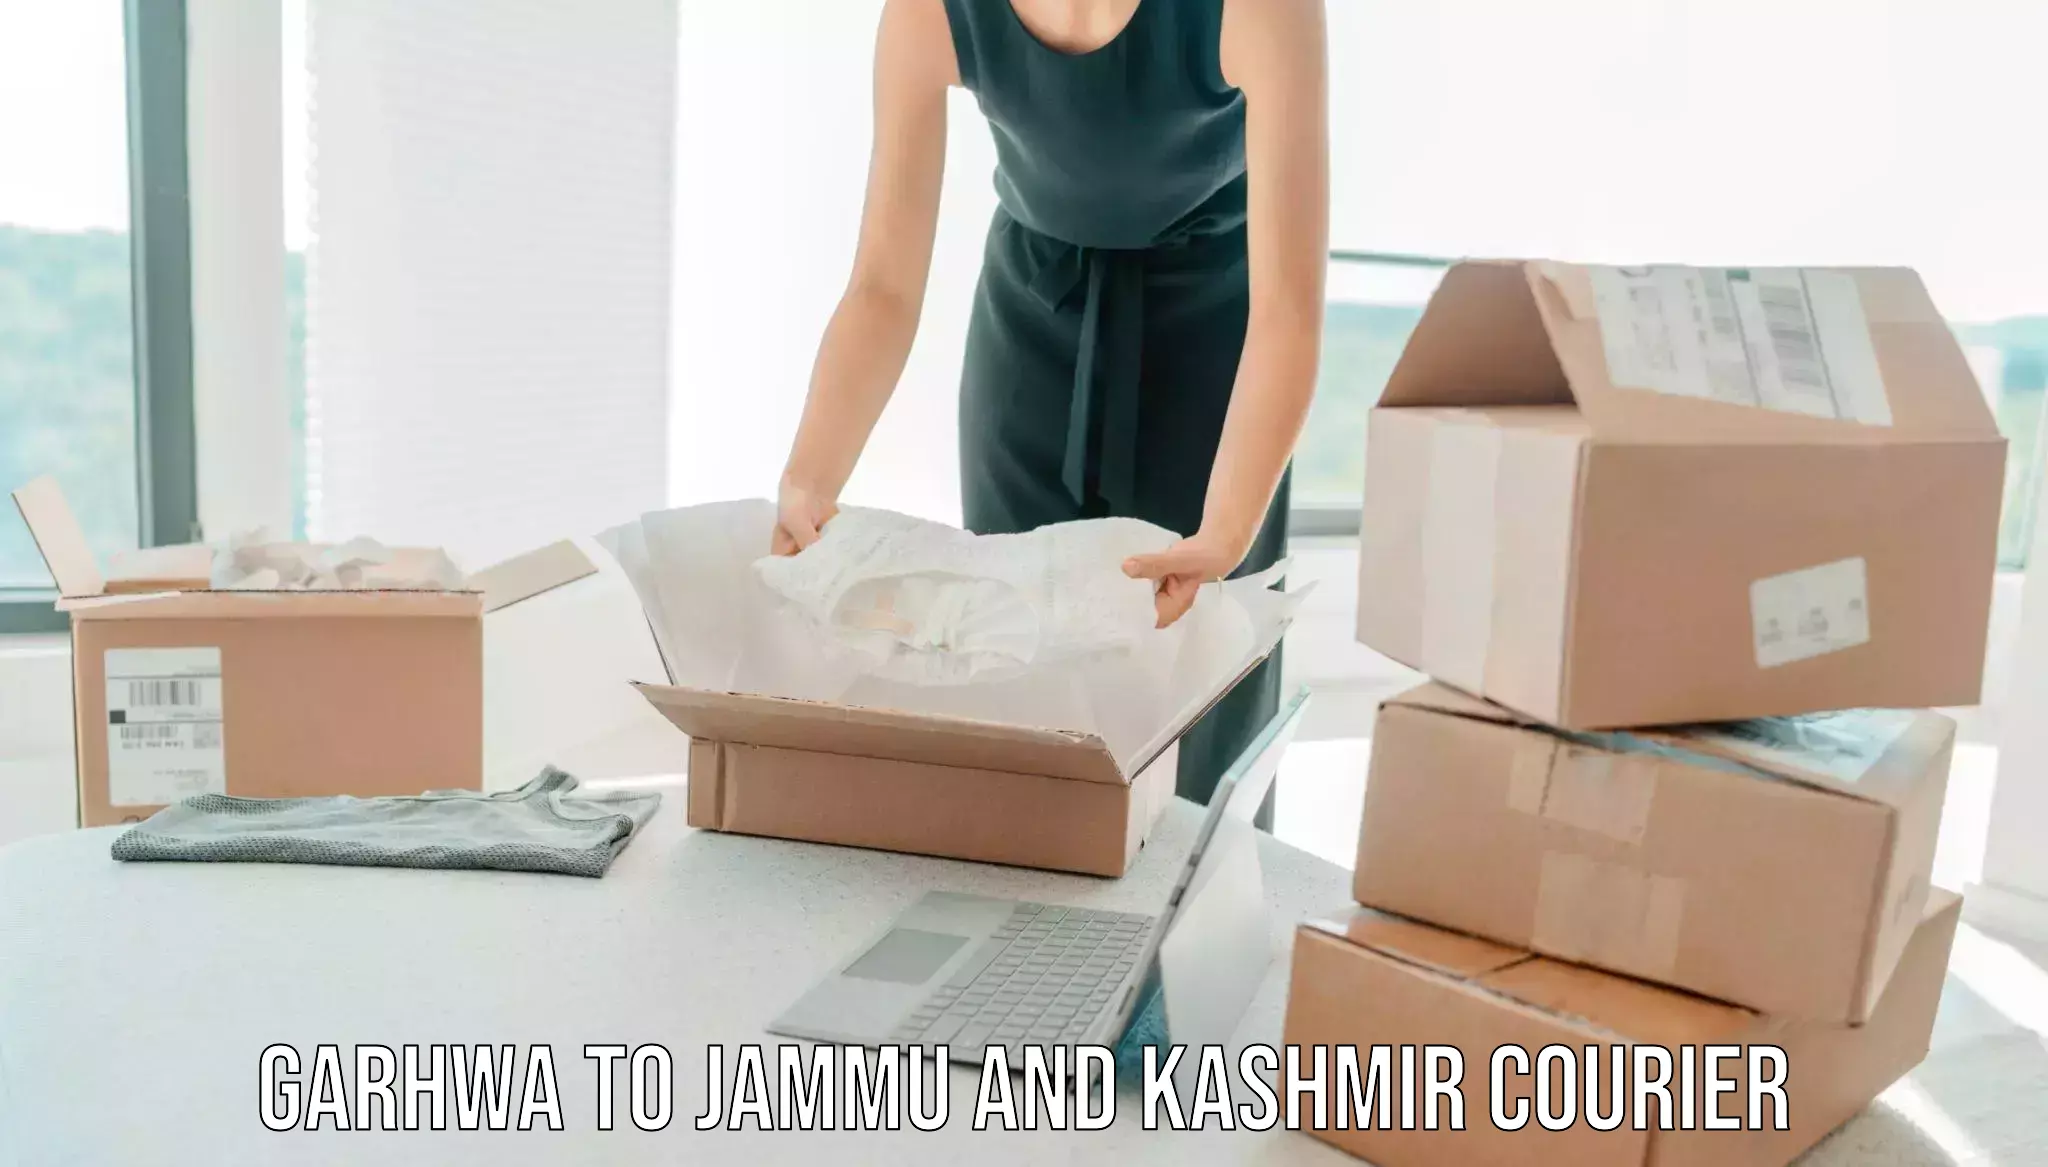 Professional movers and packers Garhwa to Srinagar Kashmir